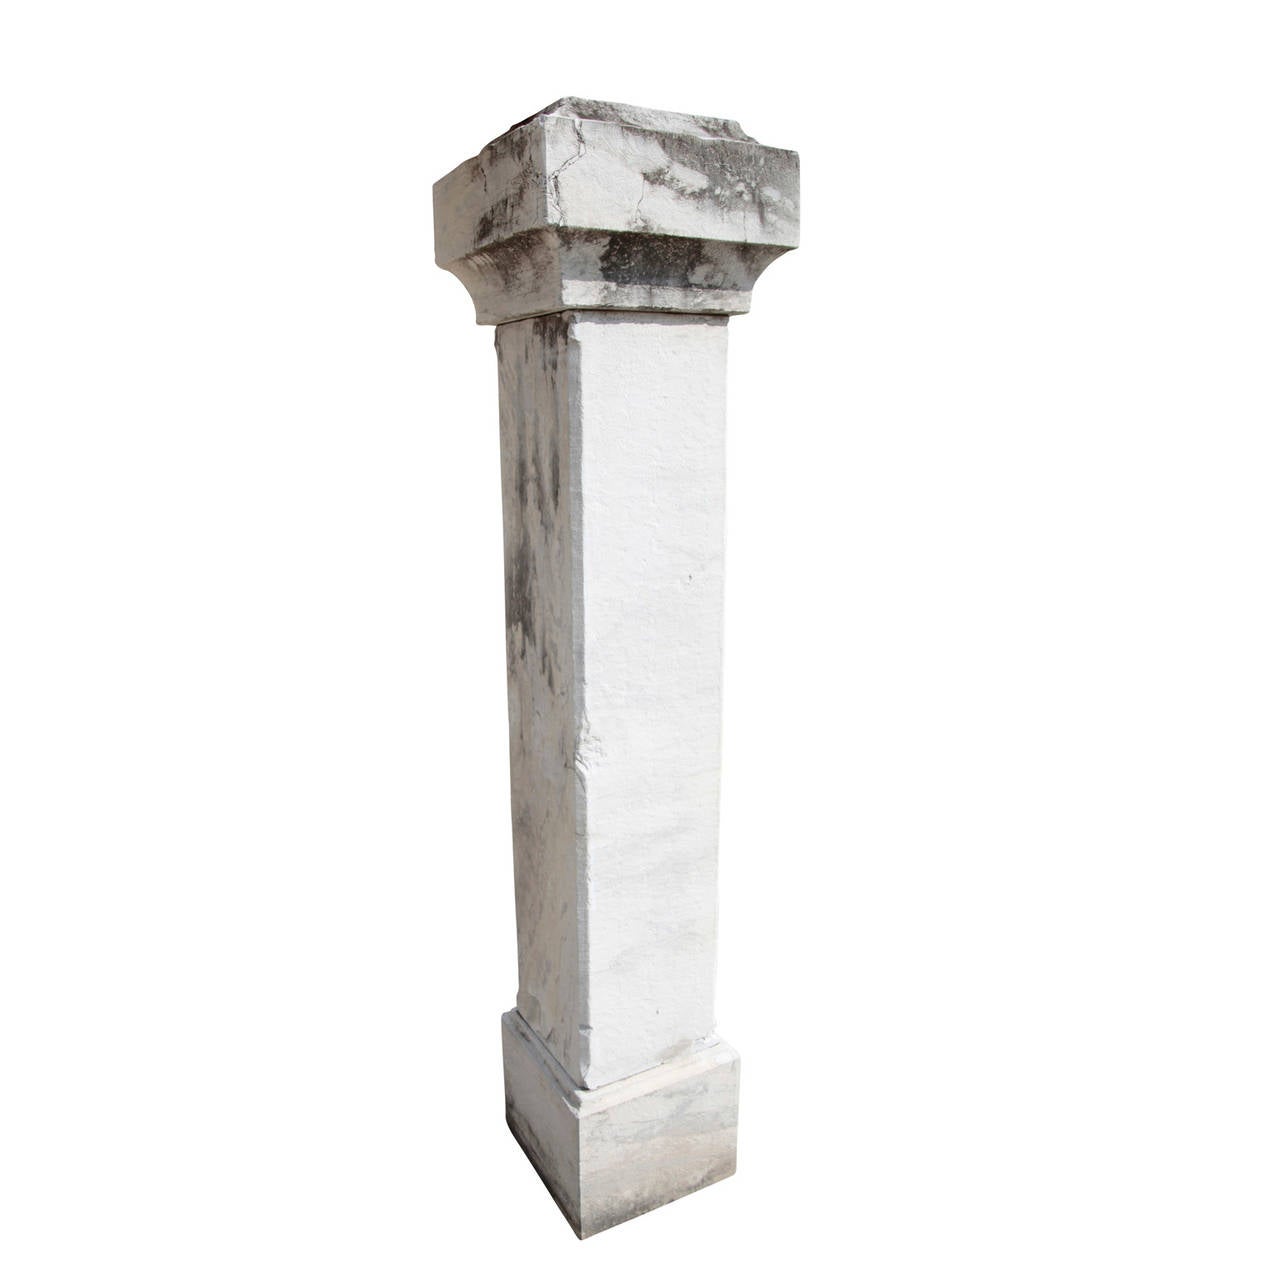 Wonderful Pair of Pillars from the 19th / 20th Century.
The marble pillars have a cuboid base and a monolith shaft with slanted corners. They are topped with a cuboid capital with a fillet.